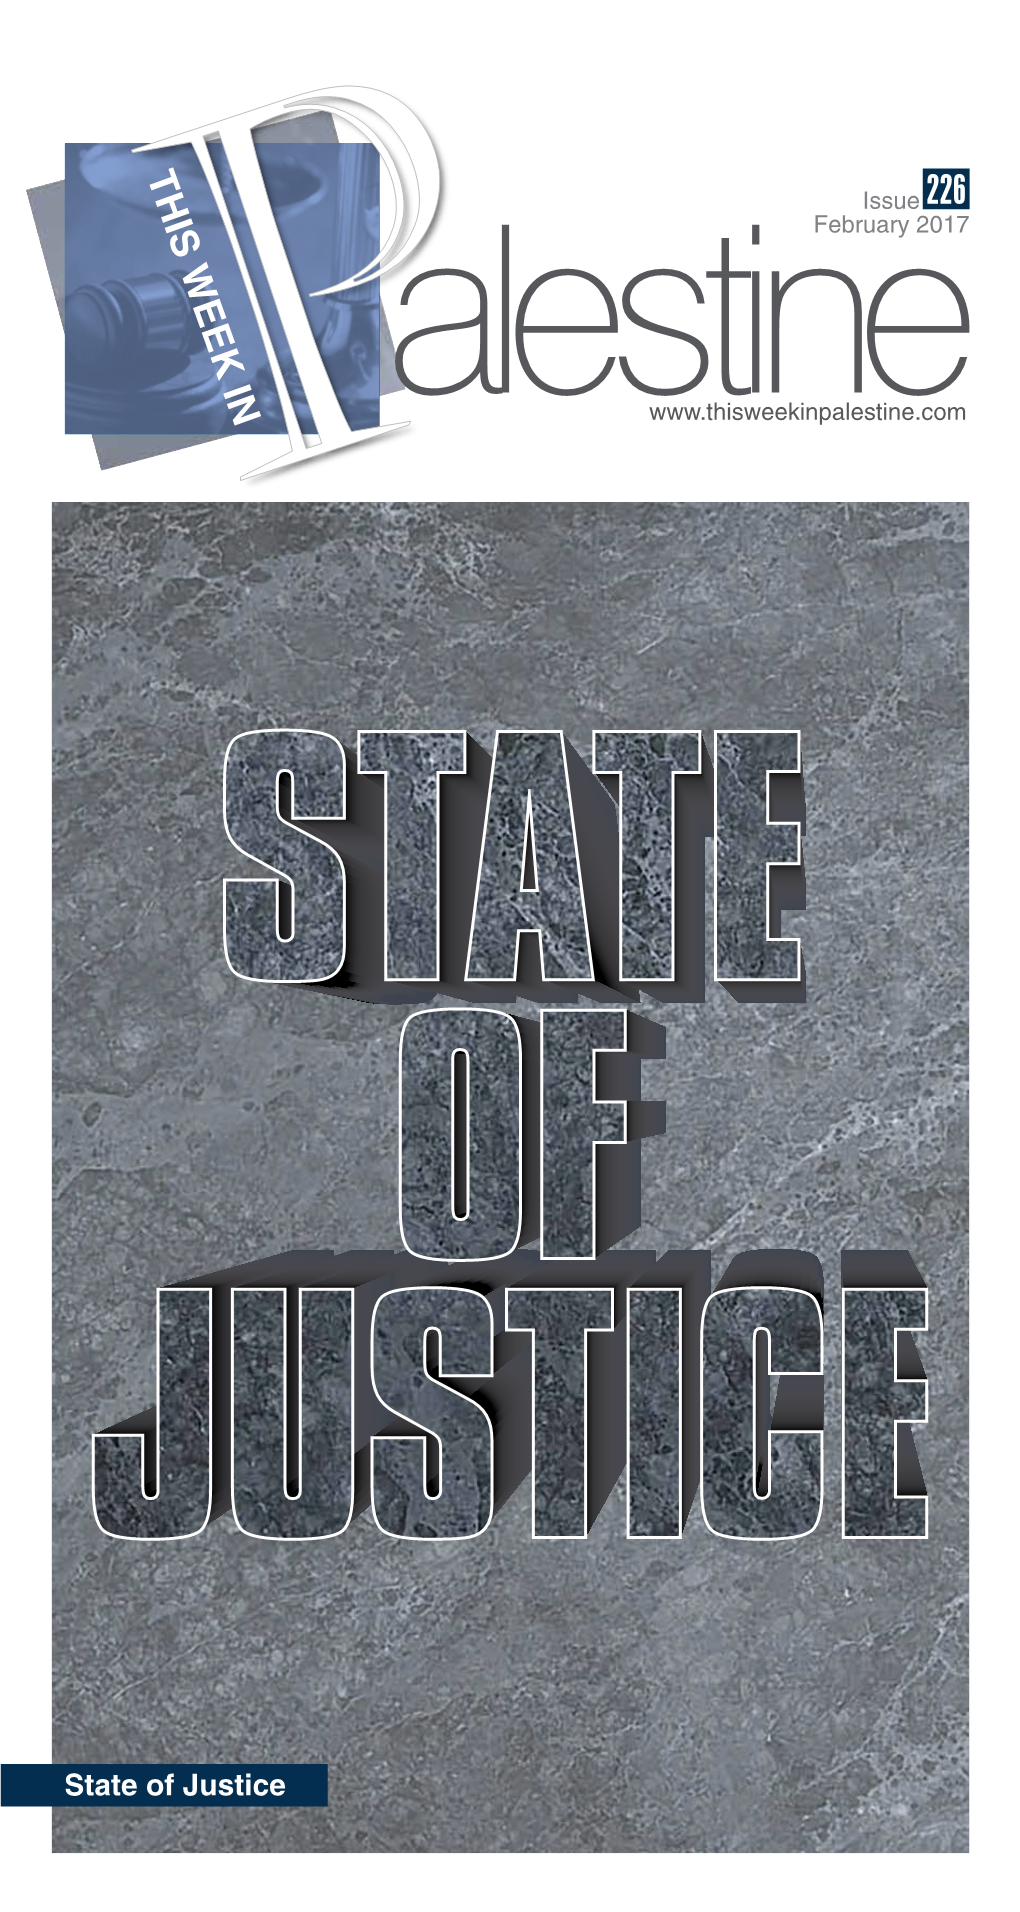 State of Justice in This Issue This Issue Deals with the Internal Aspects of Justice in Palestine